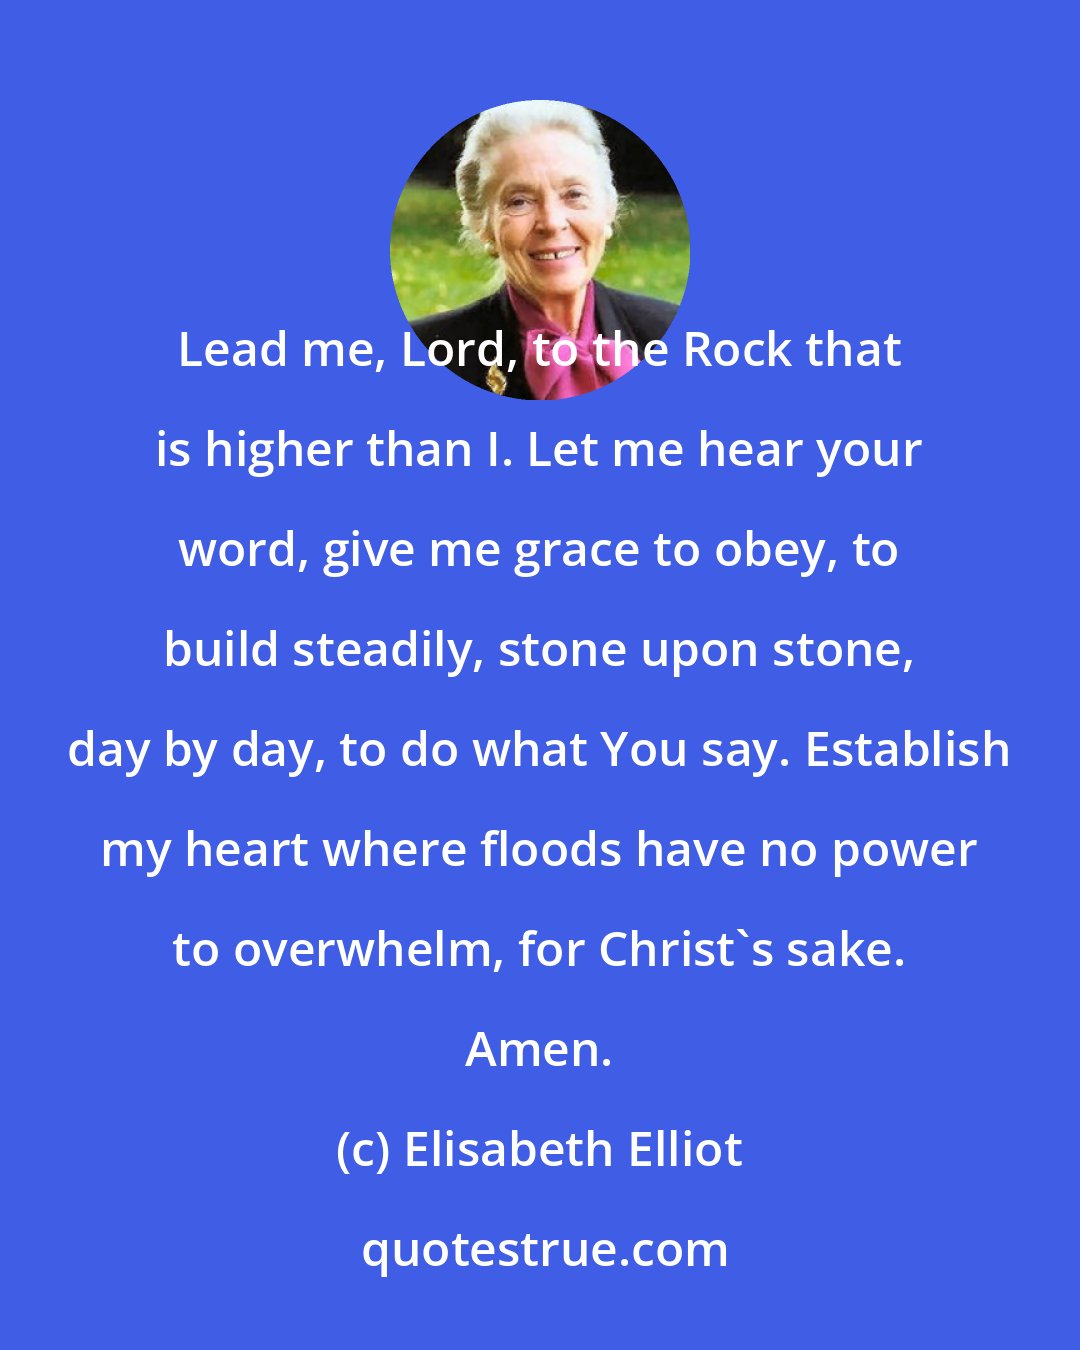 Elisabeth Elliot: Lead me, Lord, to the Rock that is higher than I. Let me hear your word, give me grace to obey, to build steadily, stone upon stone, day by day, to do what You say. Establish my heart where floods have no power to overwhelm, for Christ's sake. Amen.